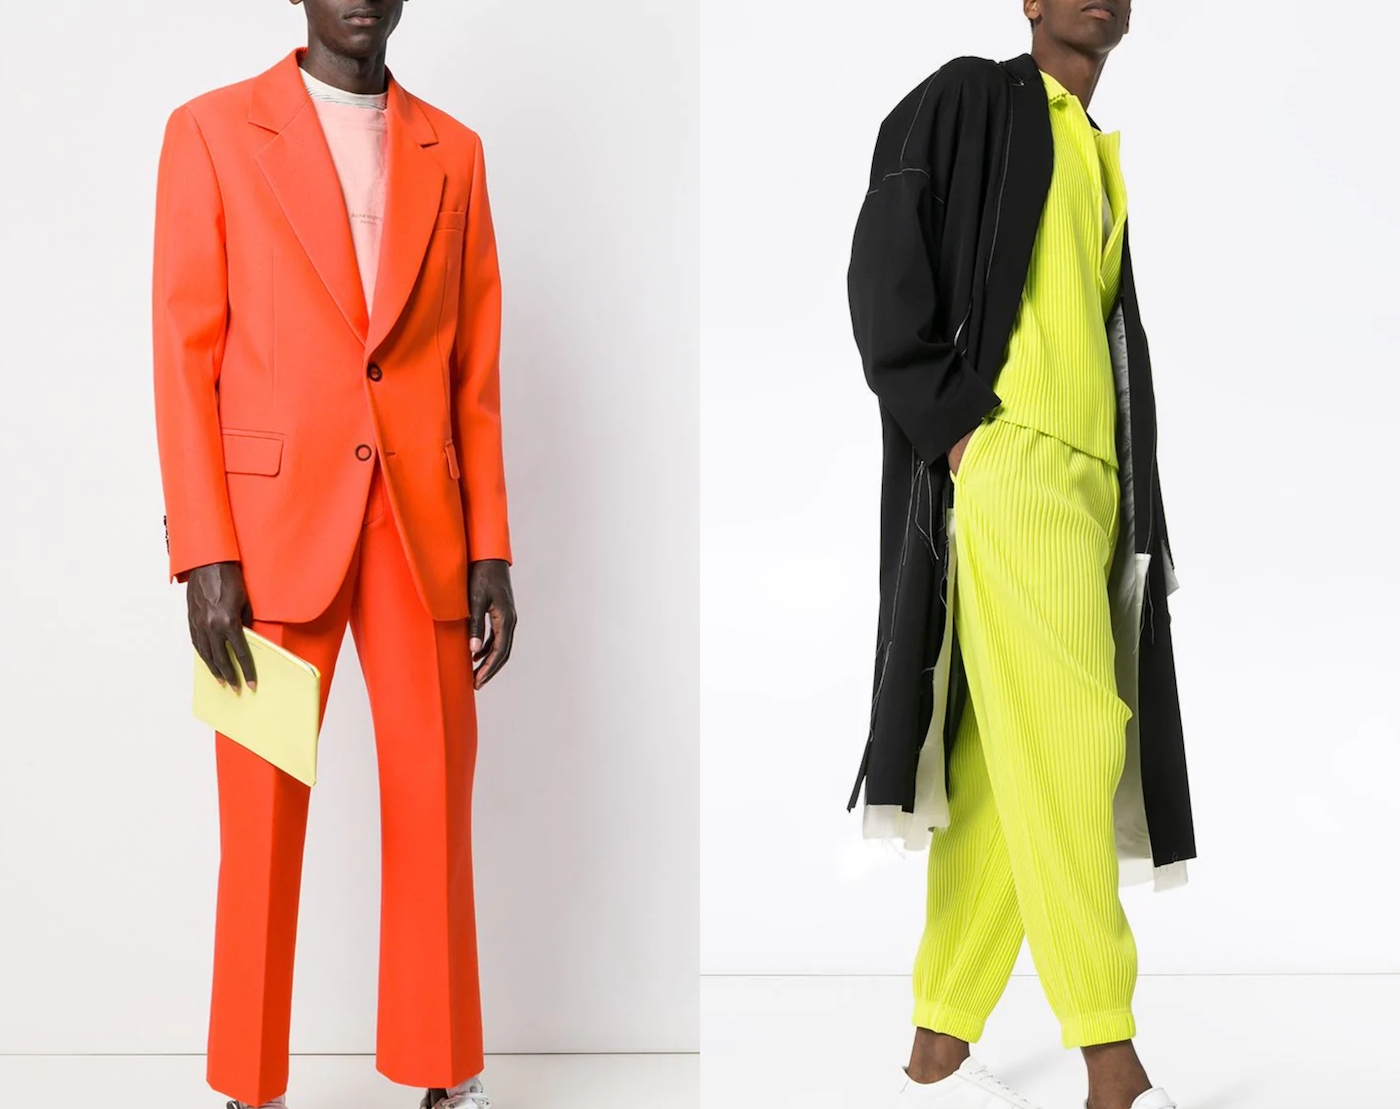 PAUSE Guide: 4 Stylish Ways to Wear Neon in 2019